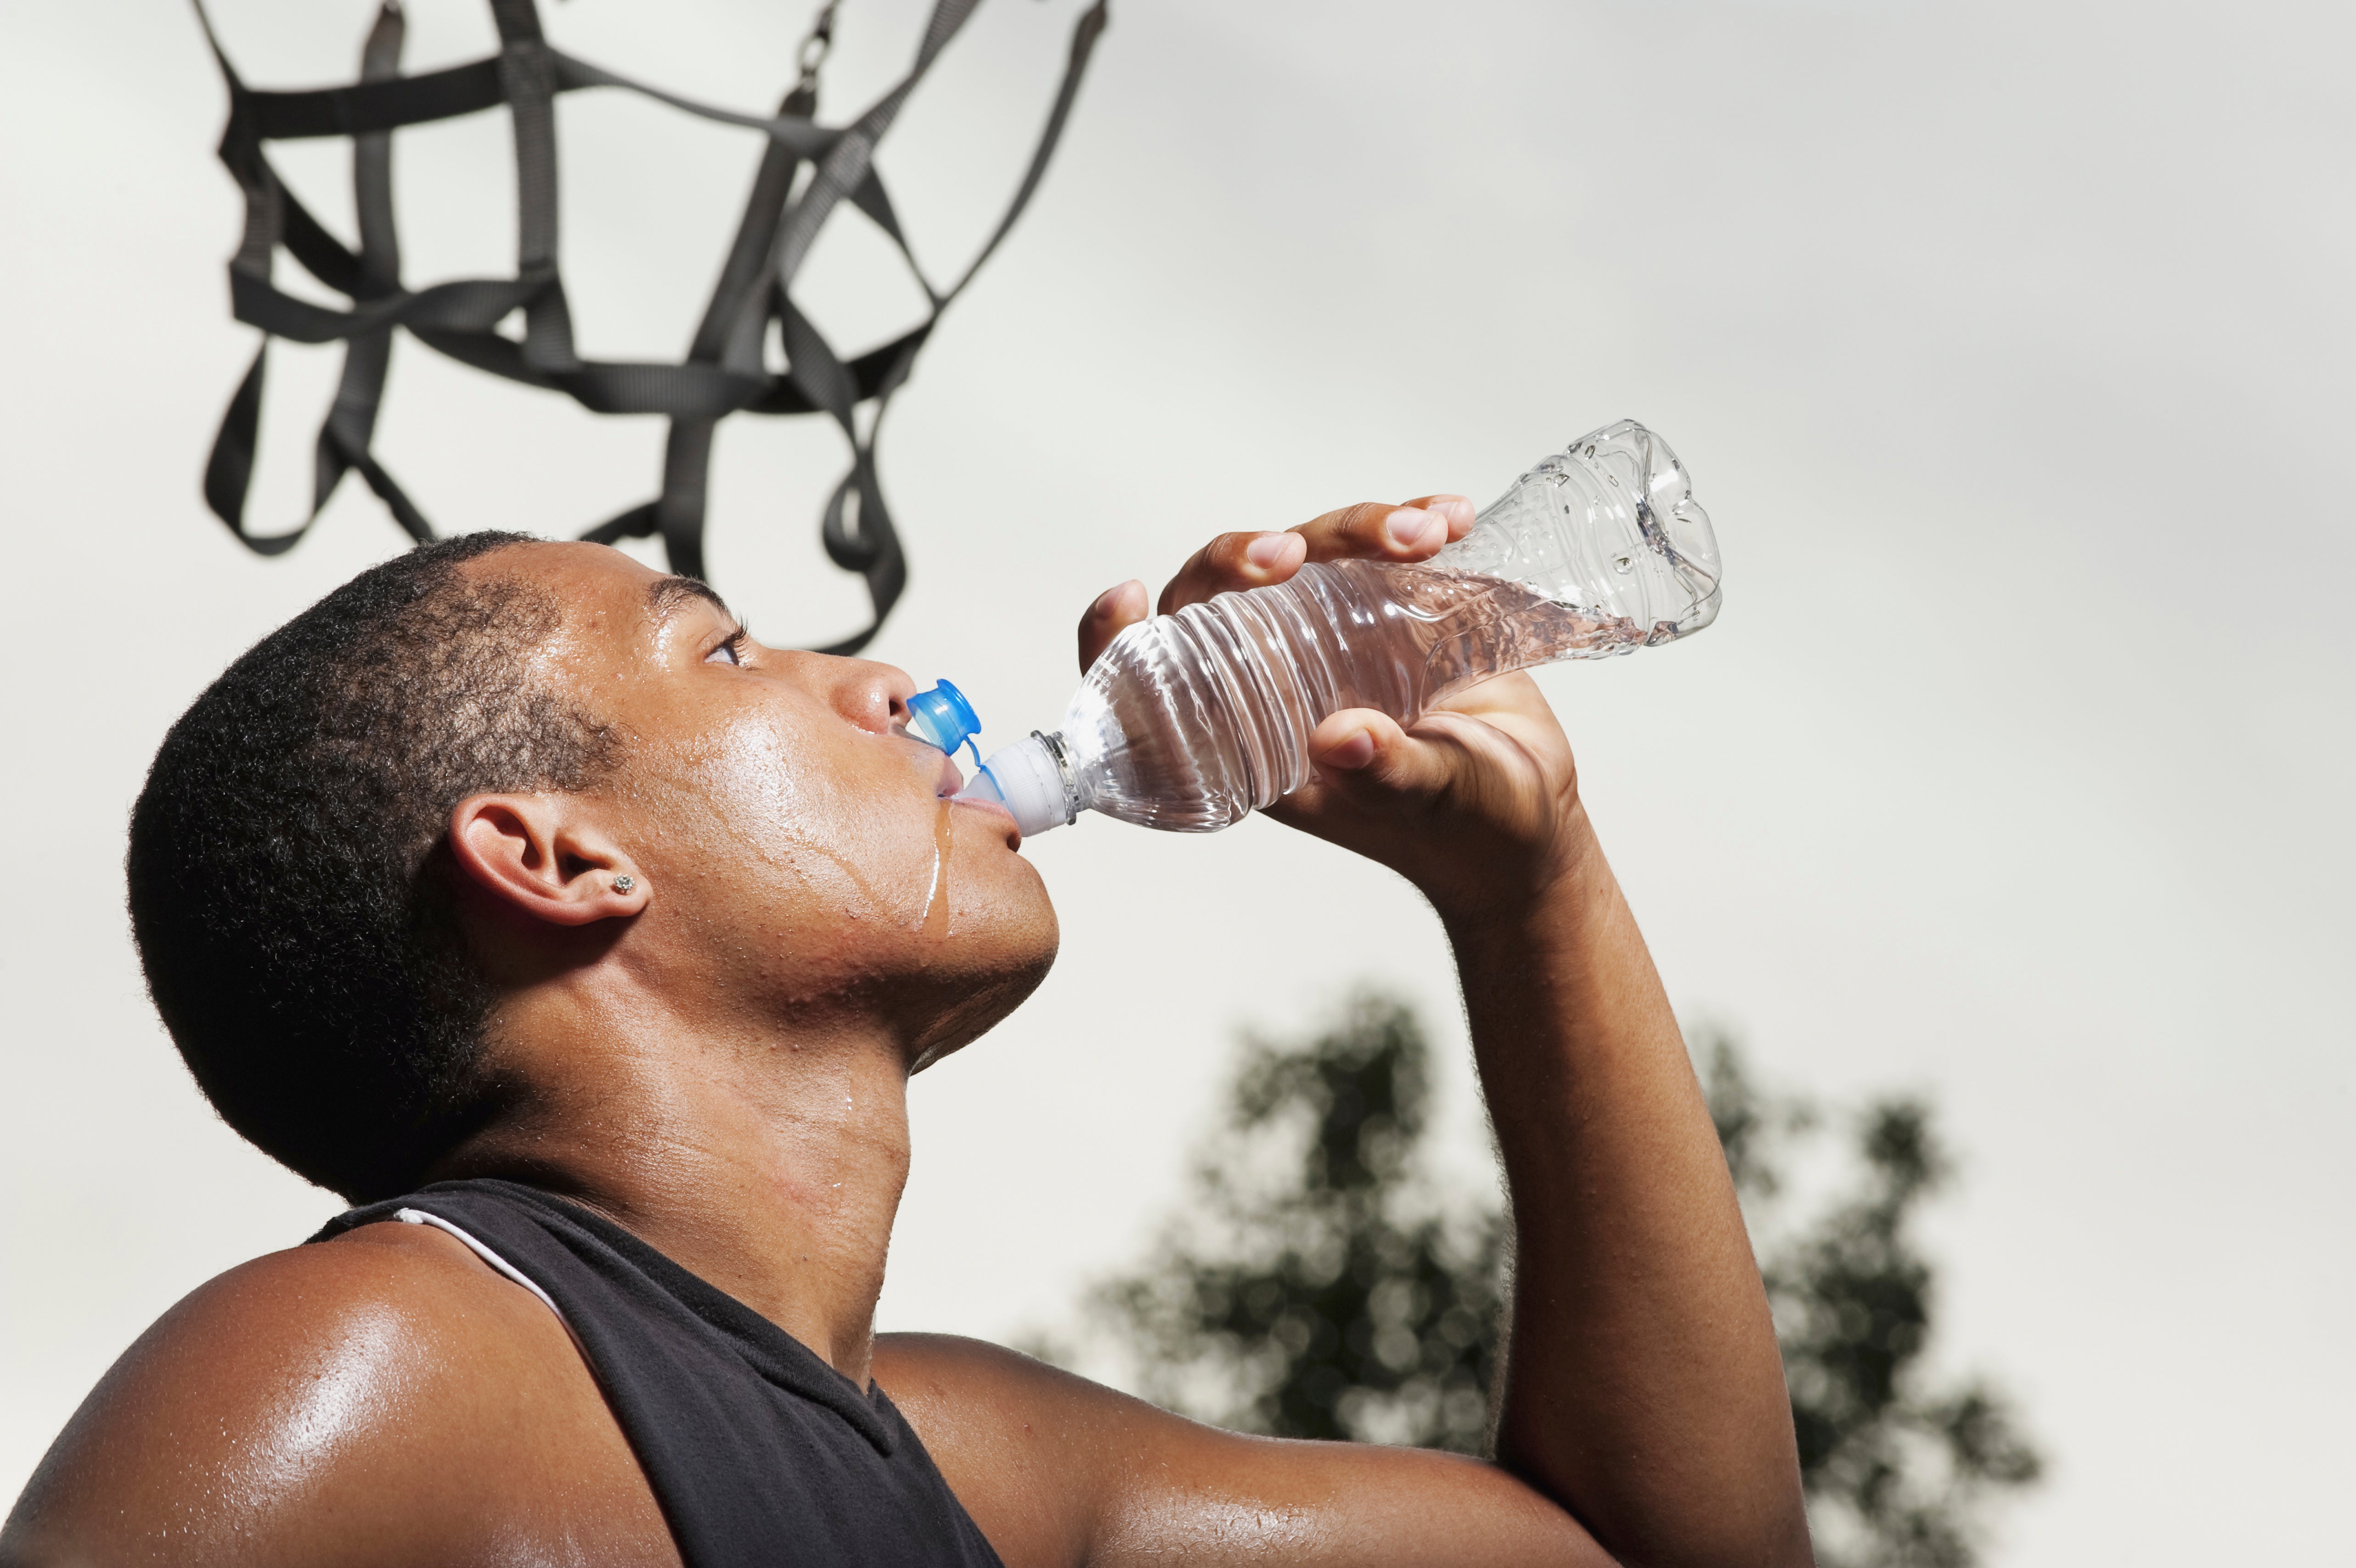 Can drinking too much water kill you?